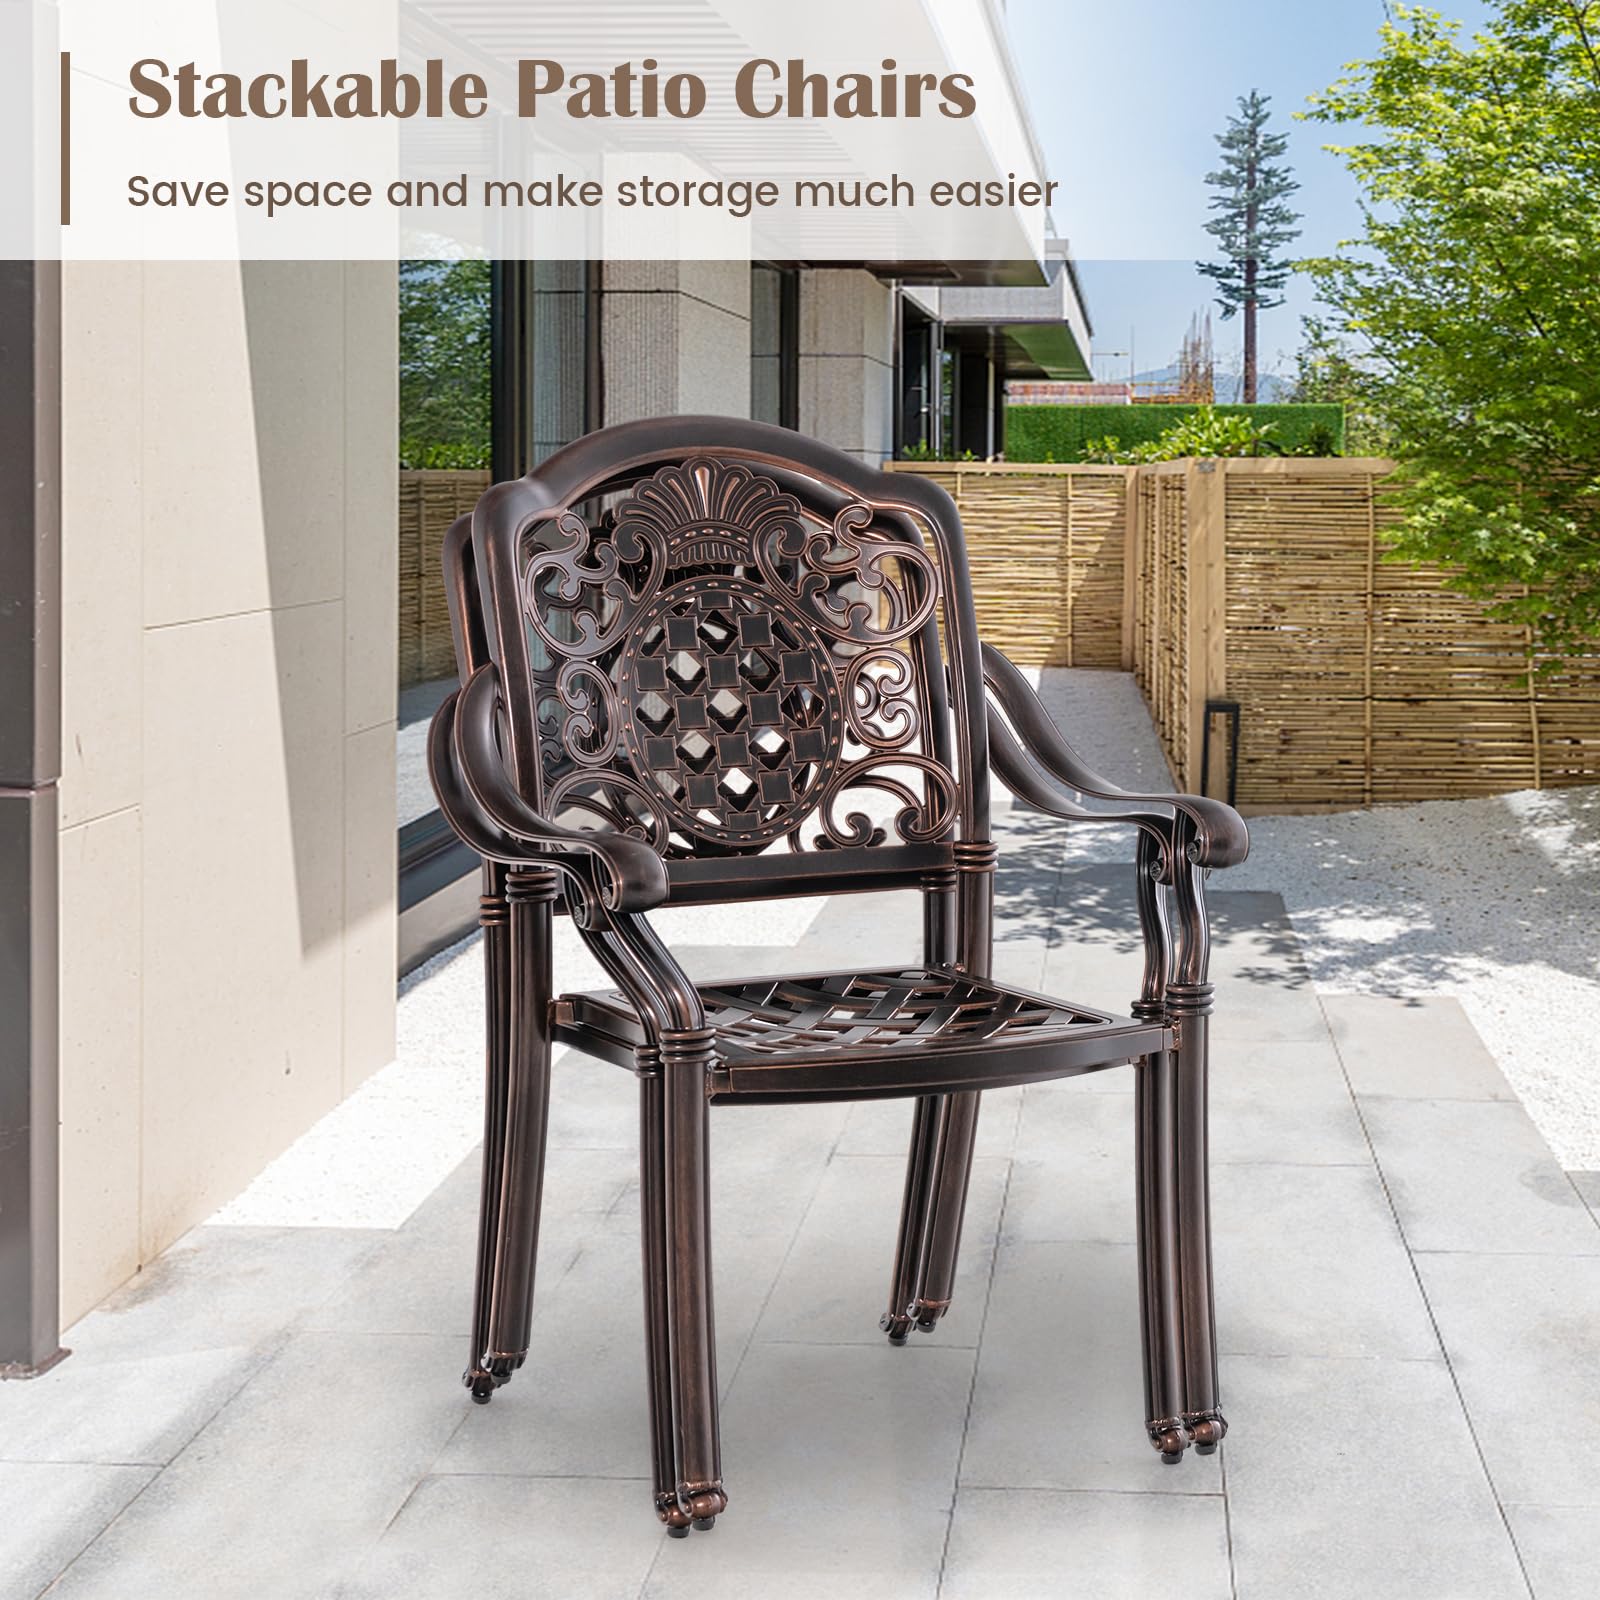 Giantex Patio Chairs Set of 2, Easy Assembly Stackable Cast Aluminum Outdoor Chairs with Armrest & Adjustable Footpads